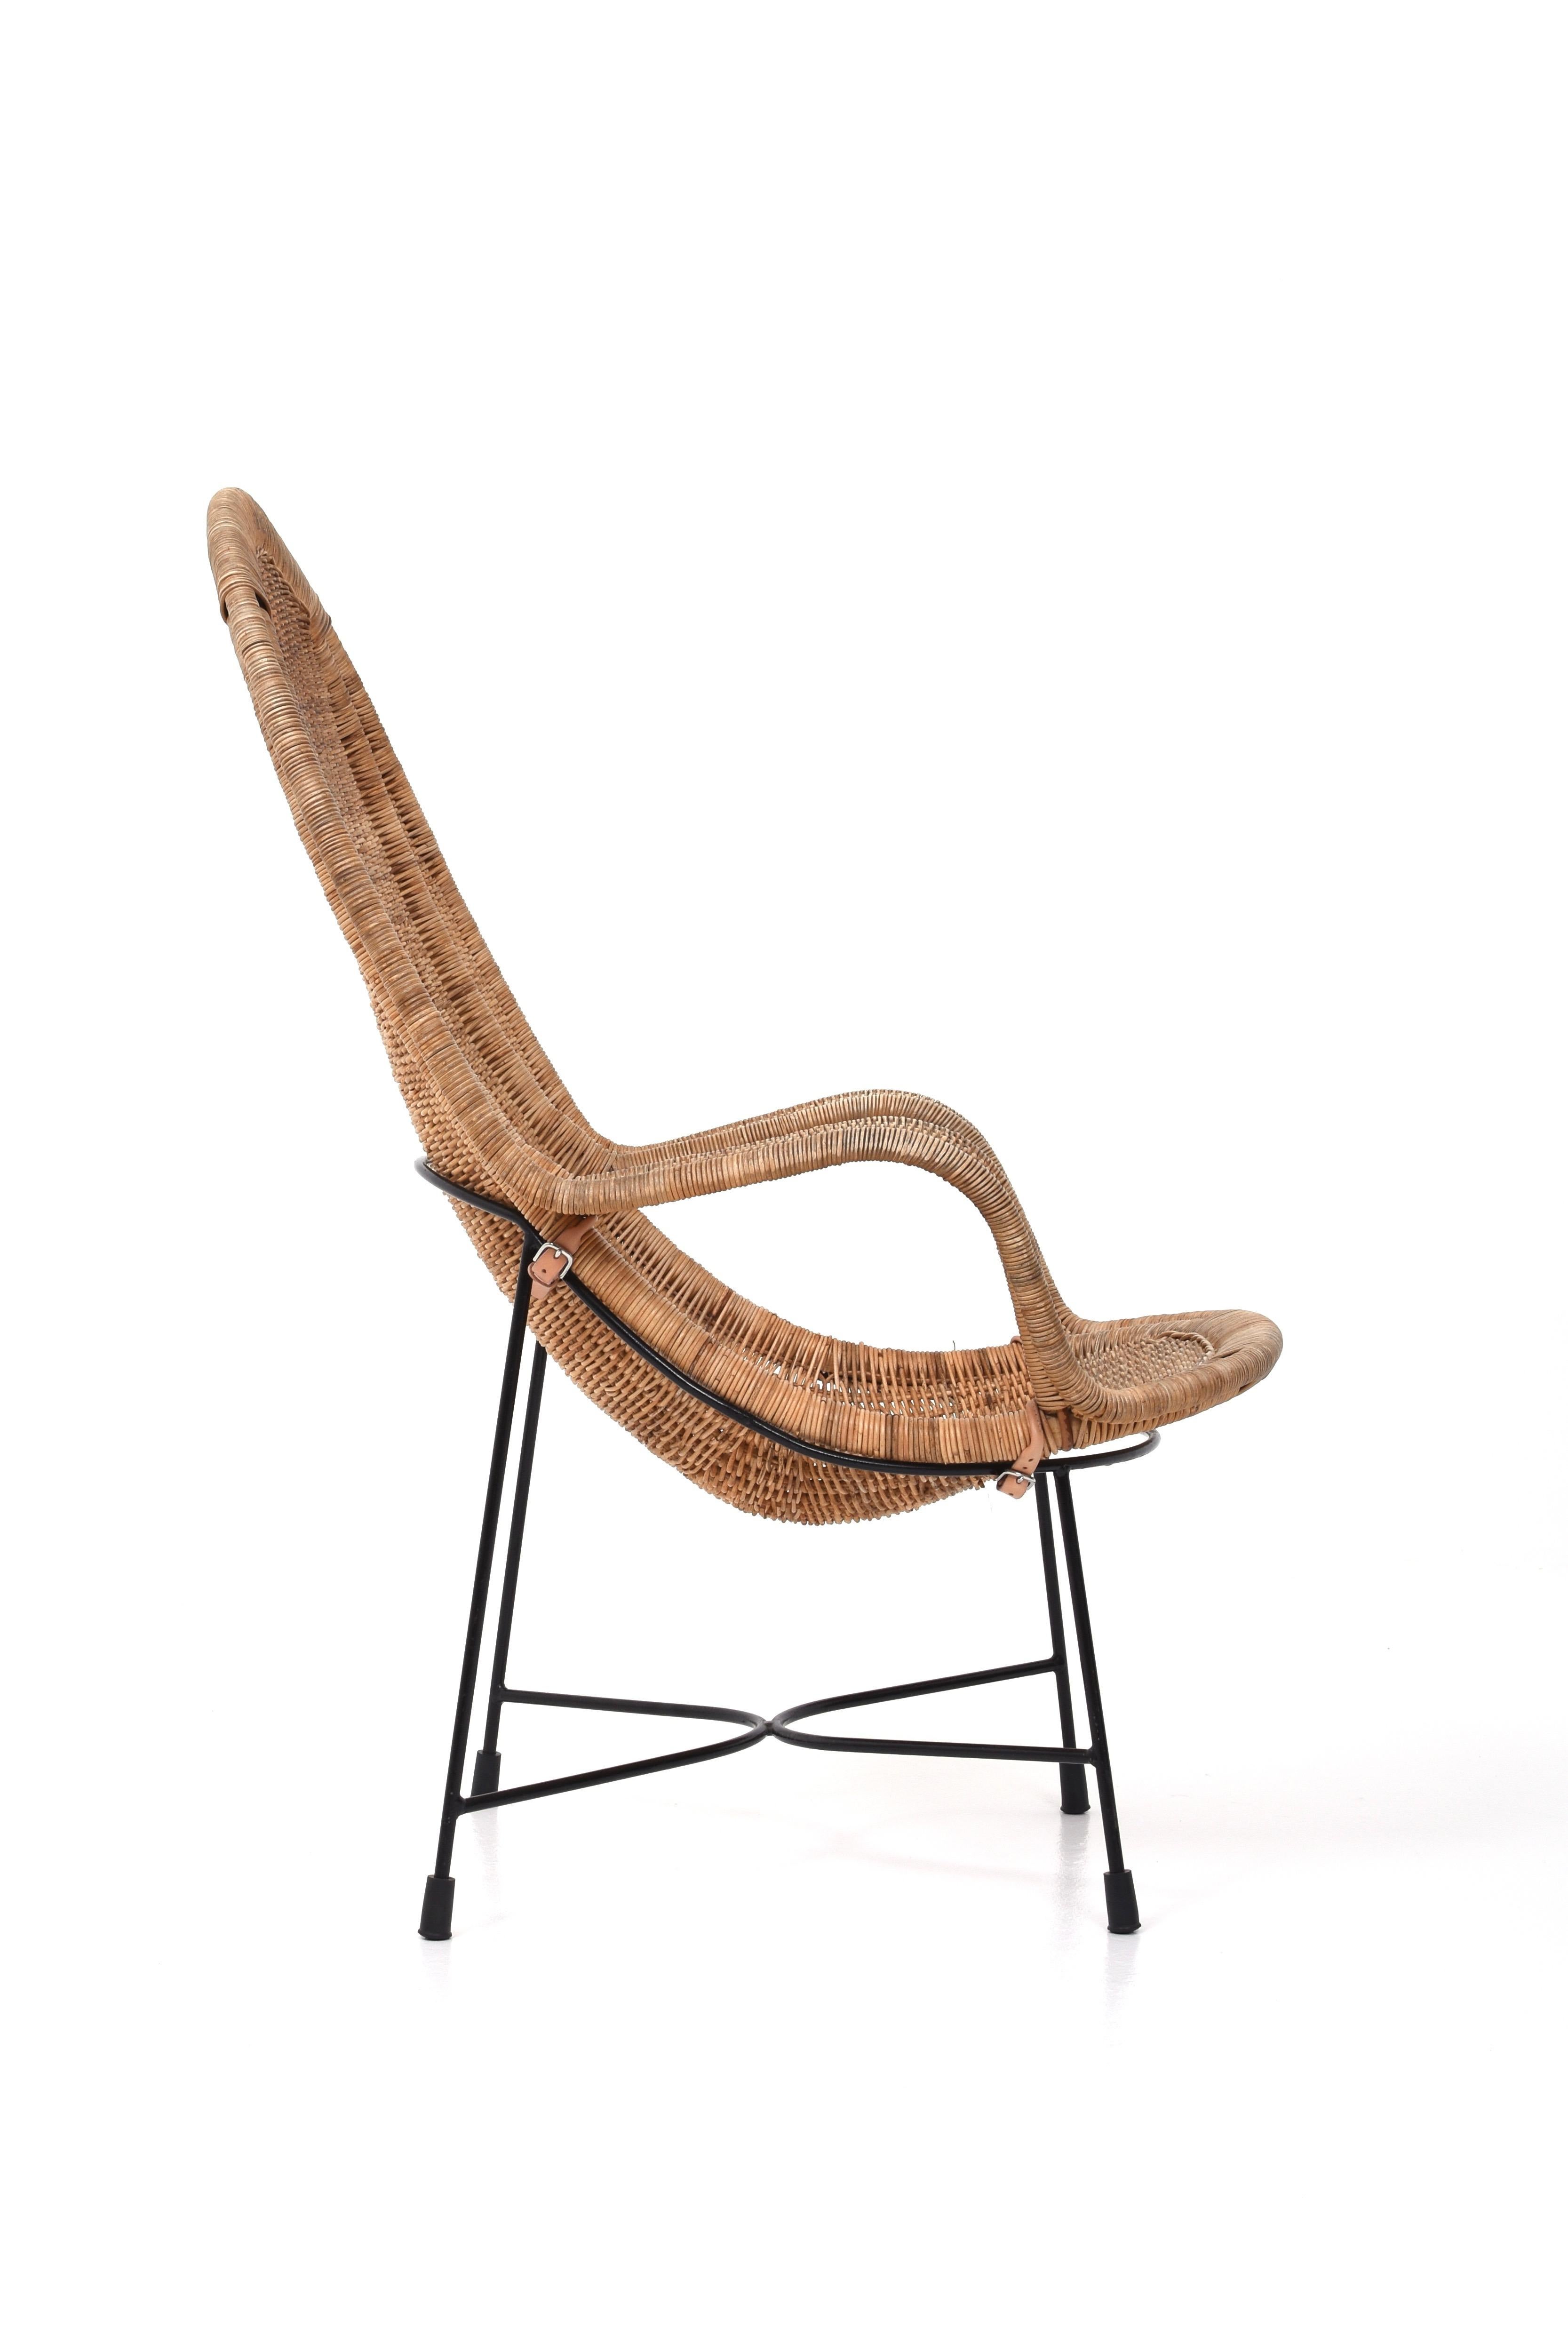 This is an unusual model called Stora Kraal and is designed by Kerstin Hörlin-Holmquist for Nordiska Kompaniet.

The armchair is woven in rattan with a black metal base held together by small leather straps.

The armchair has been given new straps,